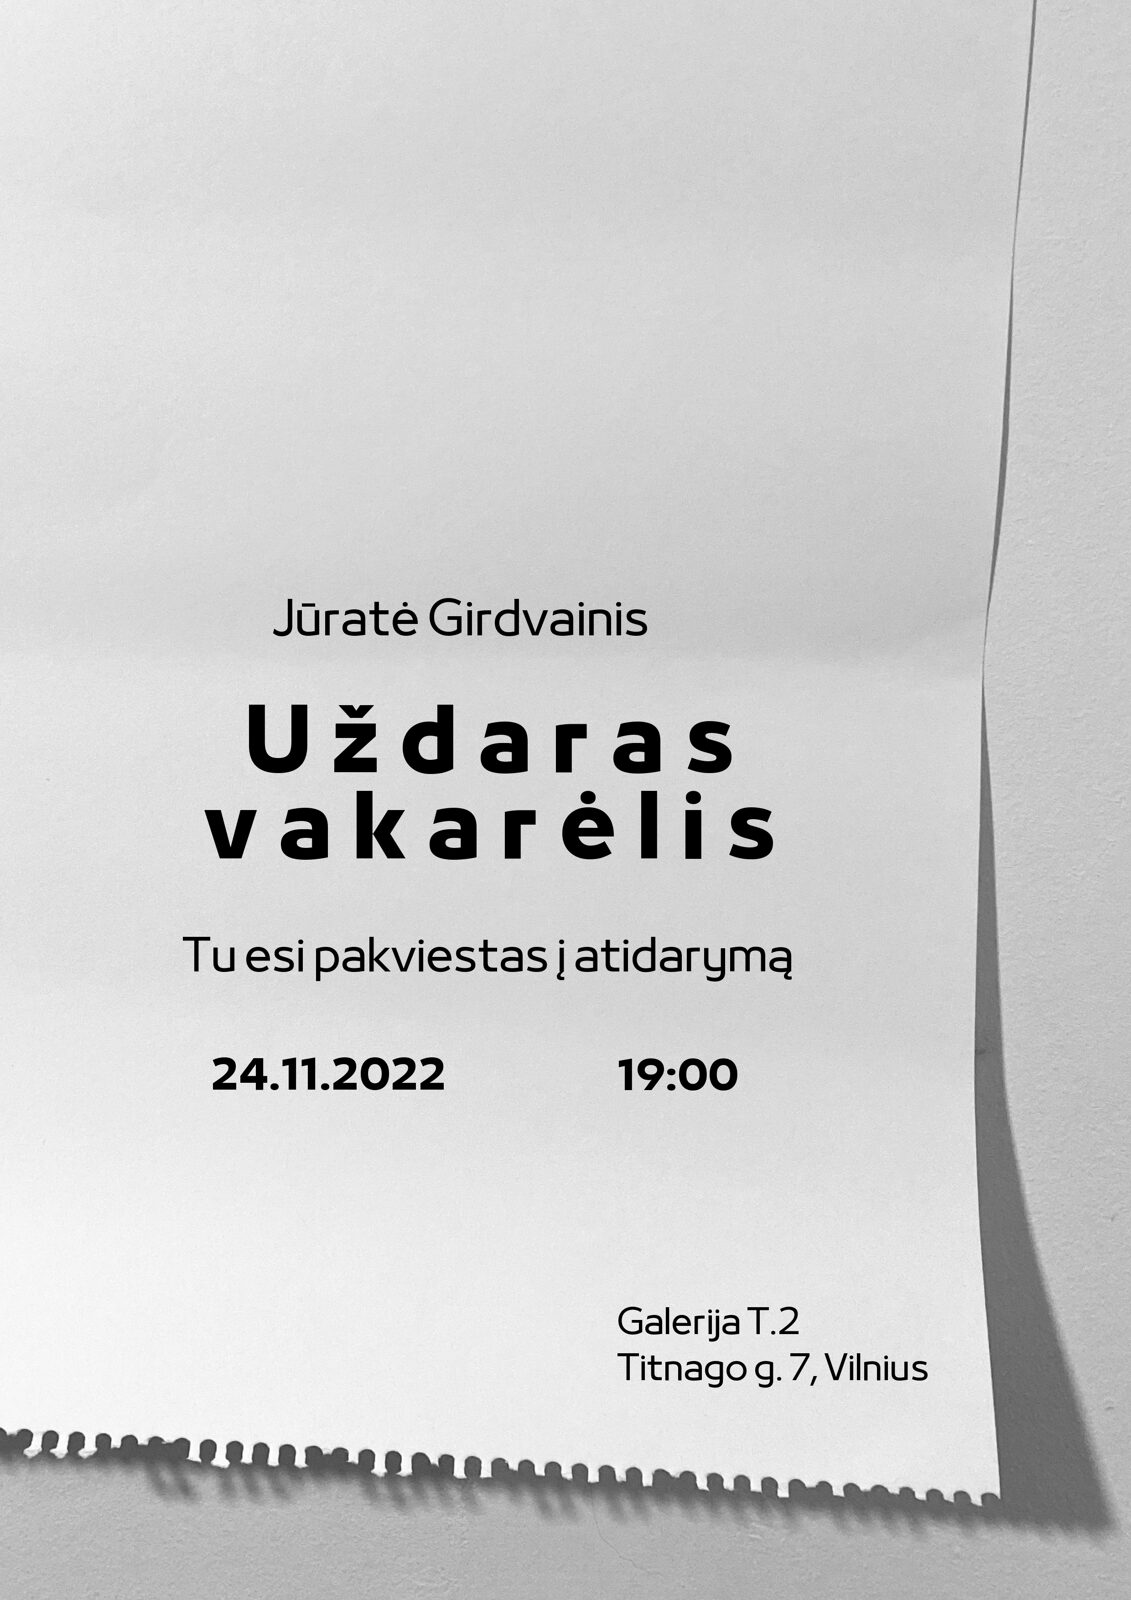 Gallery T.2 presents art exhibition by Lithuanian painter Jurate Girdvainis